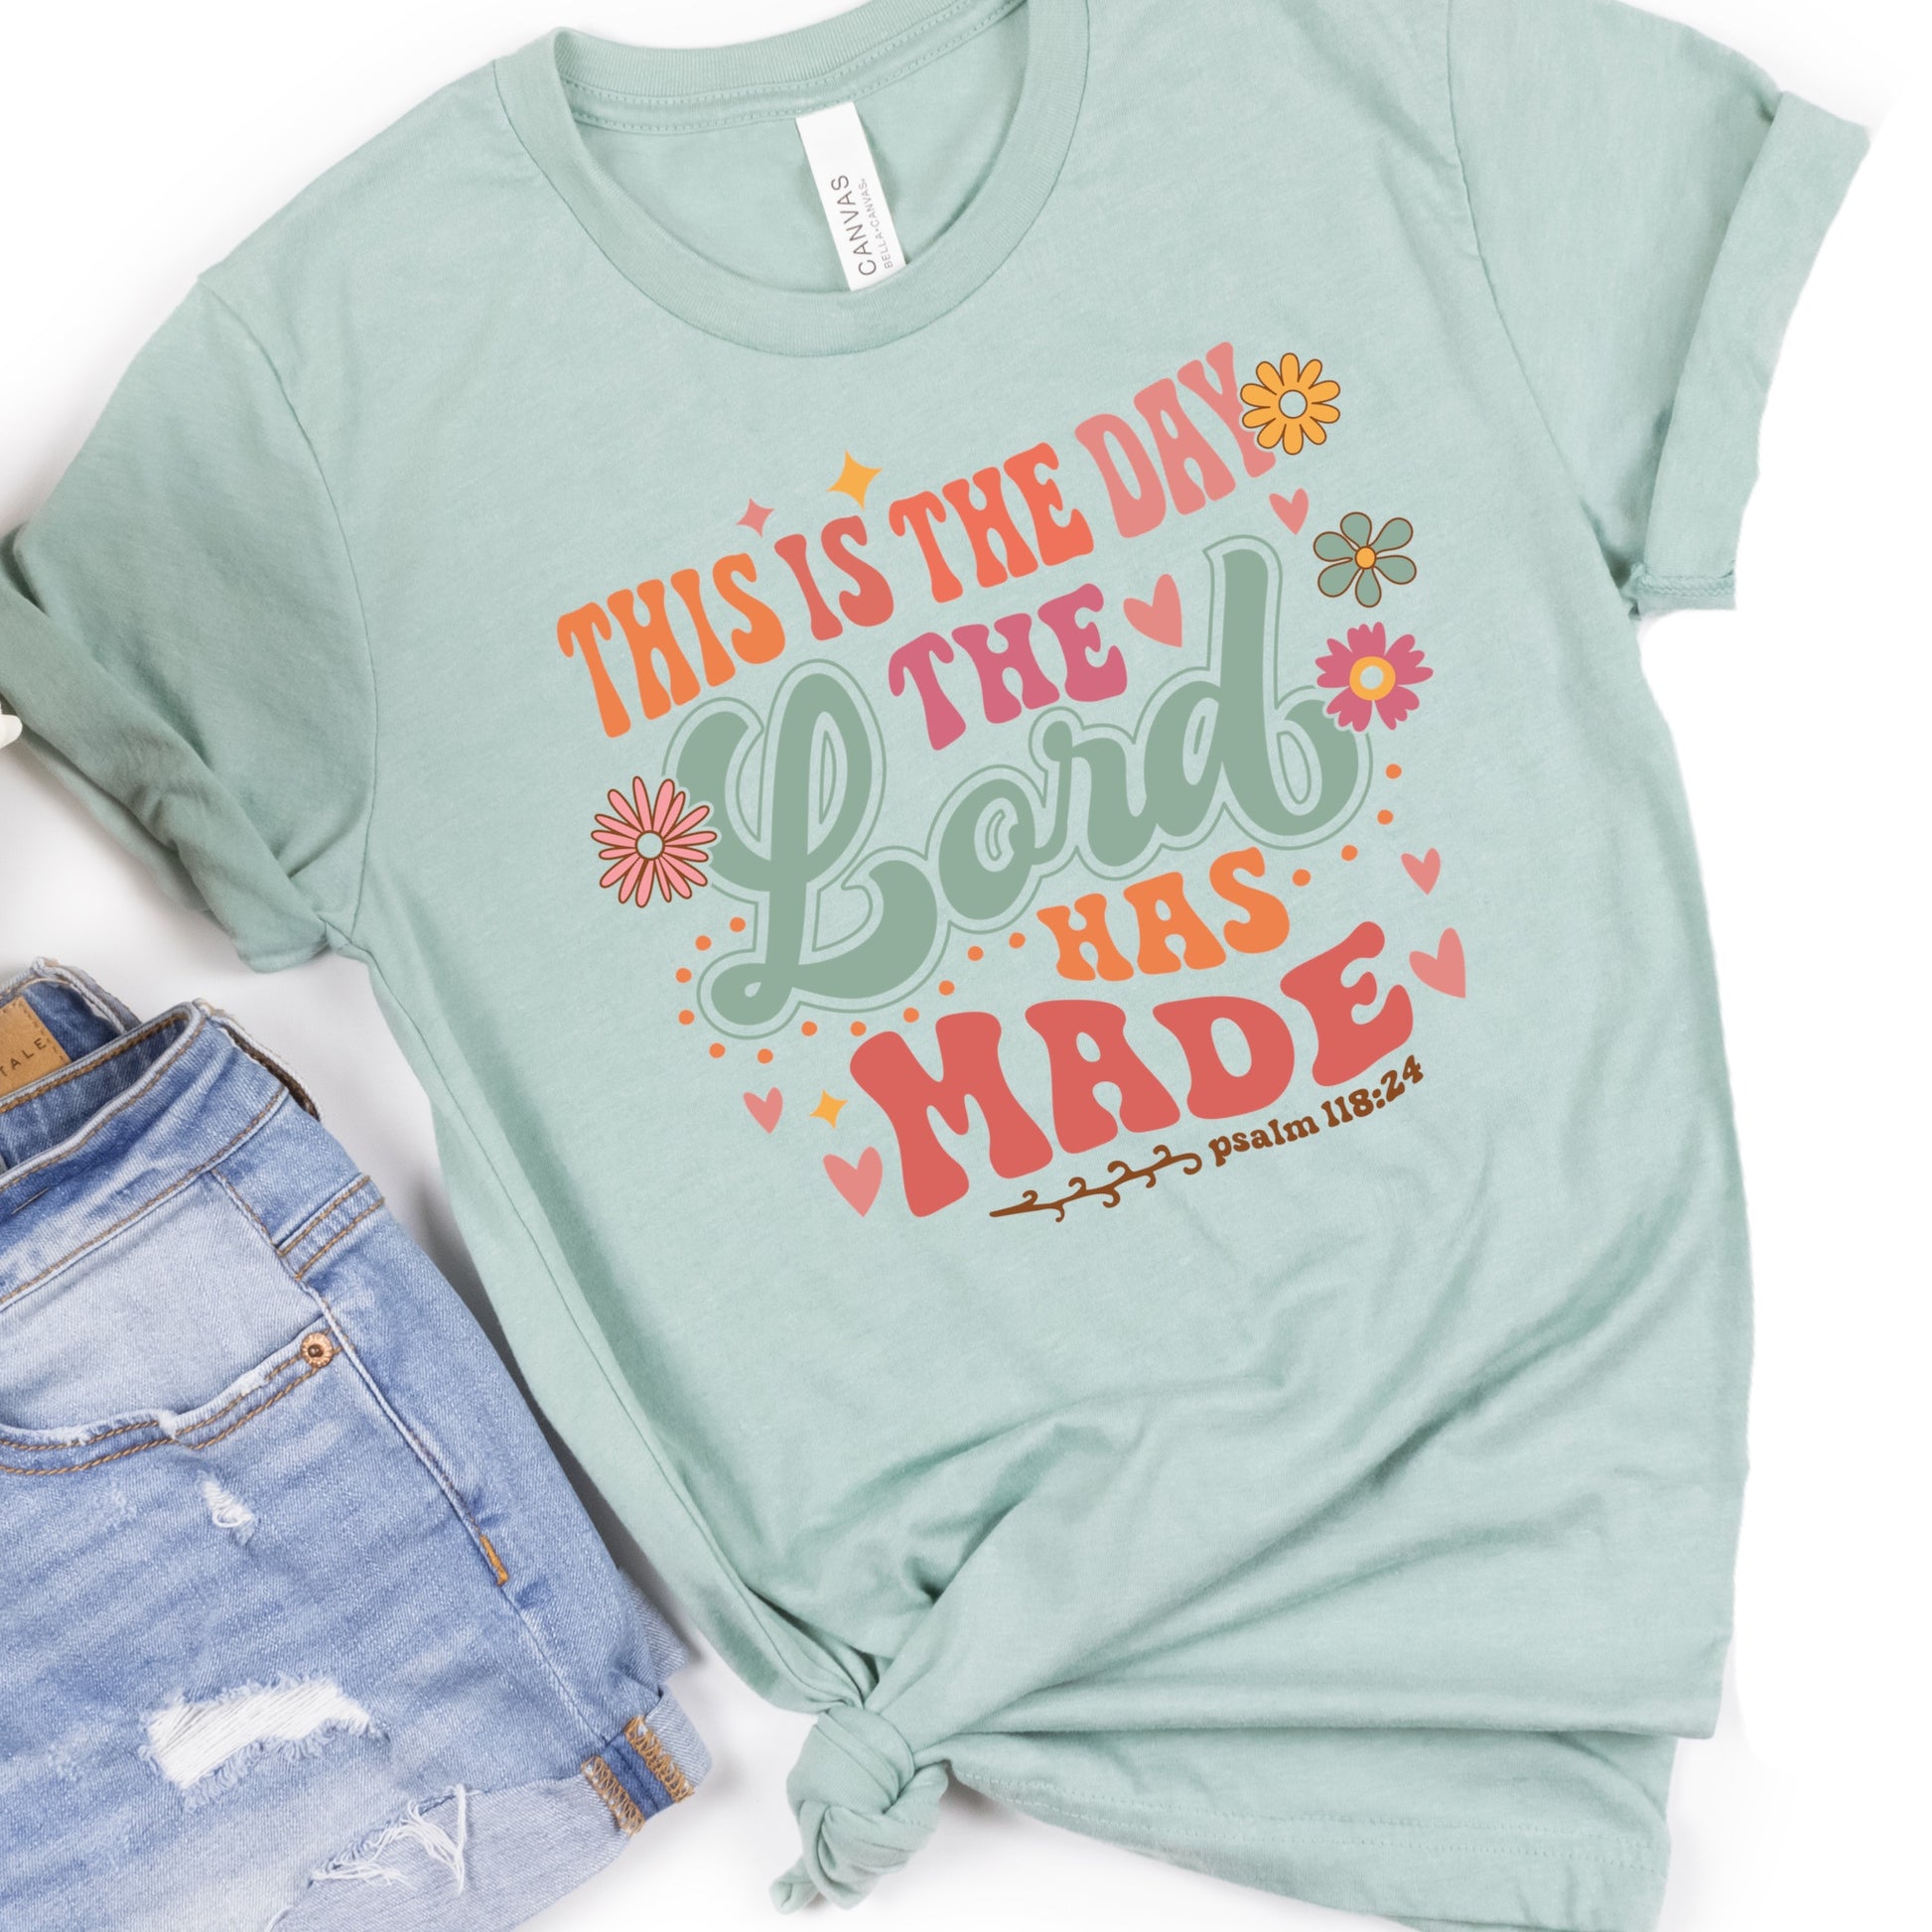 Bible verse graphic iron on with the words "This is the day the Lord has made" - DTF Iron on Transfer - Bible Verse Sublimation Iron on Transfer 